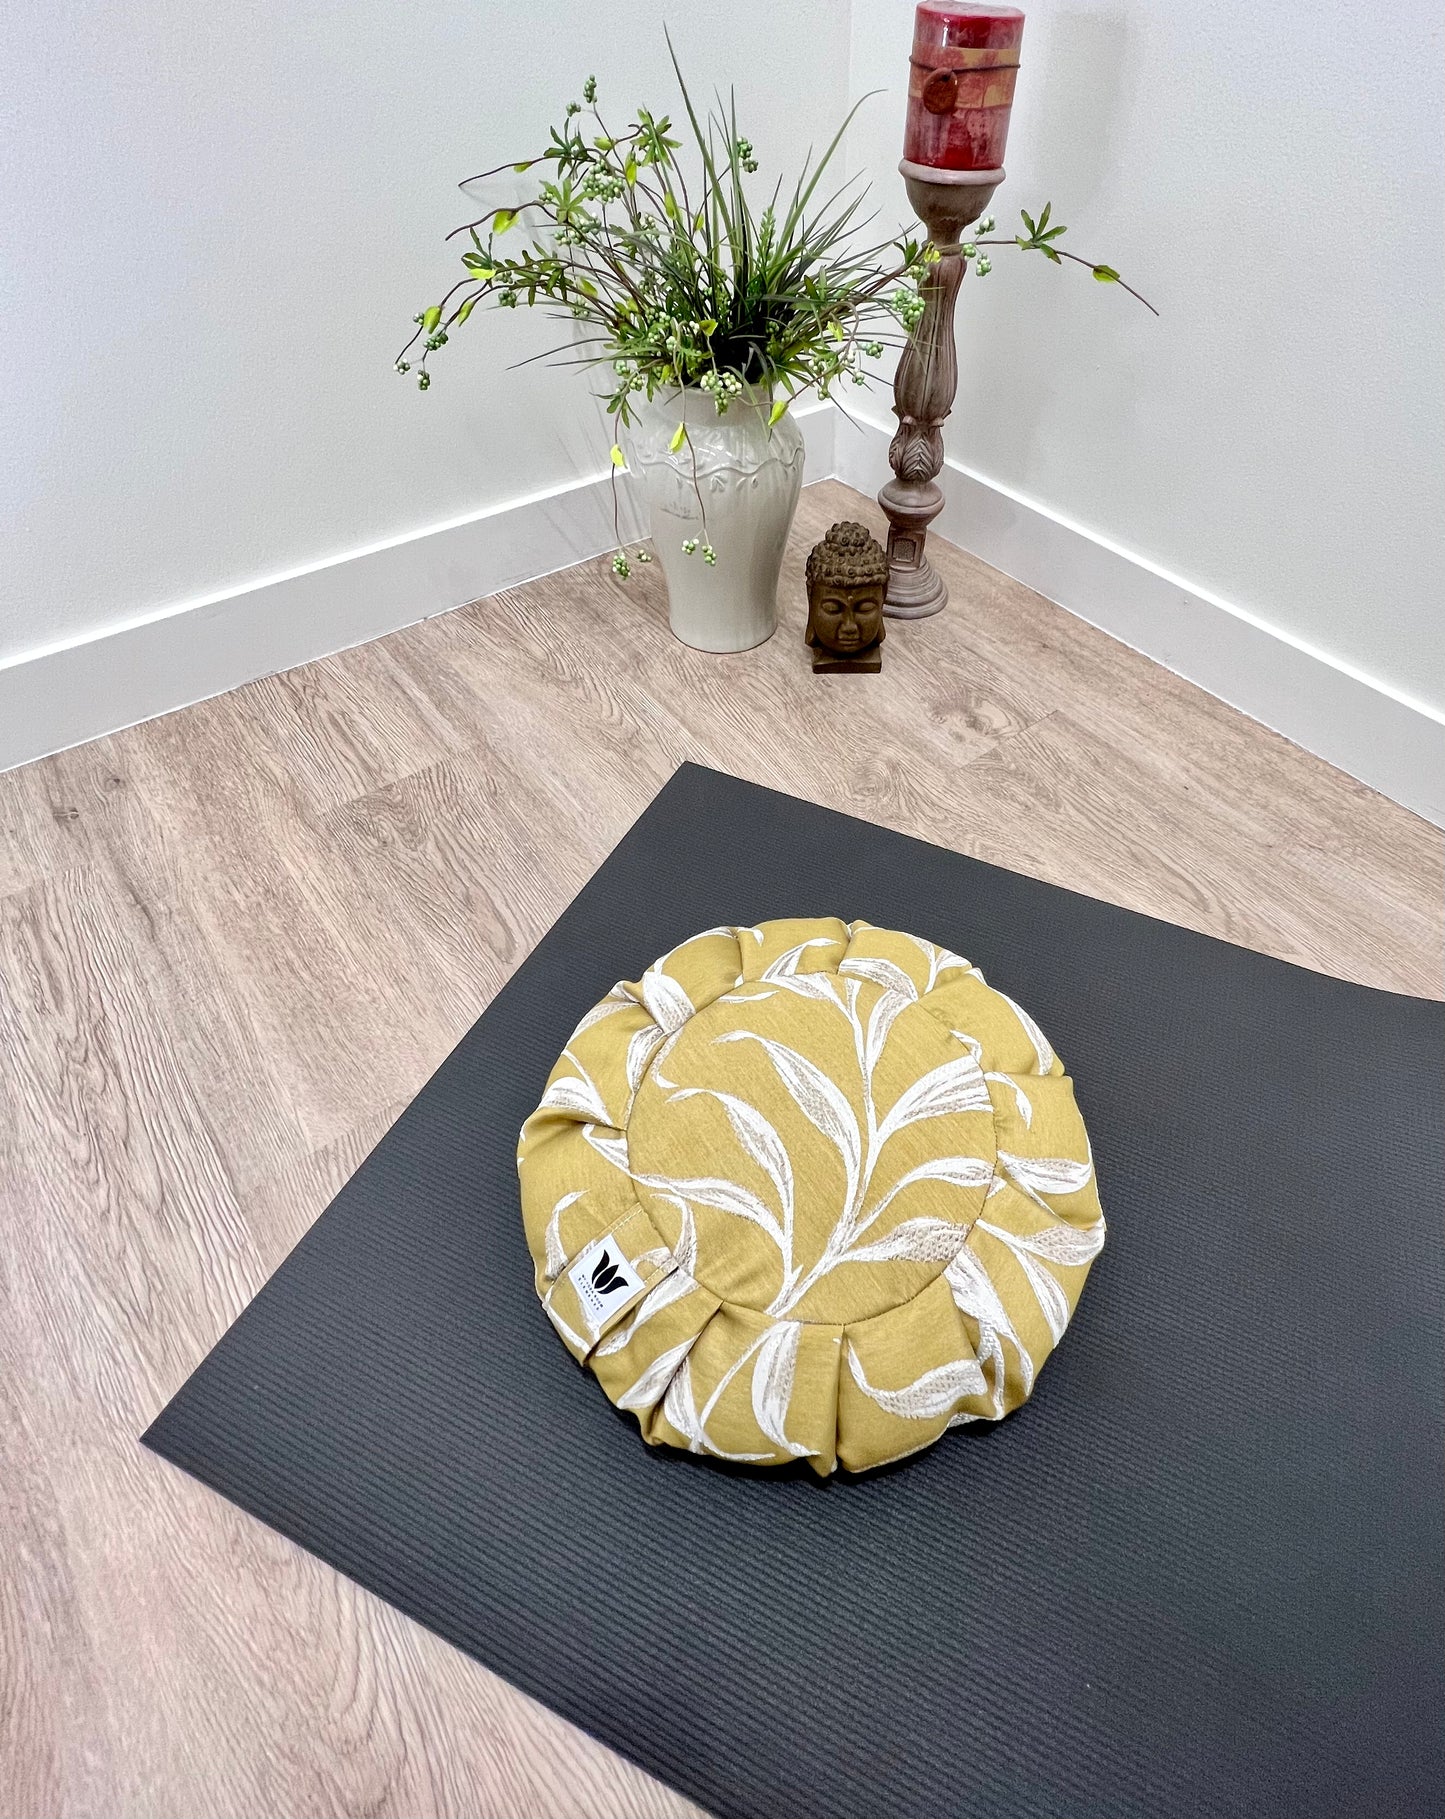 Meditation Seat Cushion Handcrafted in Yellow with an Embroidery Leaf print for yoga and meditation practice.